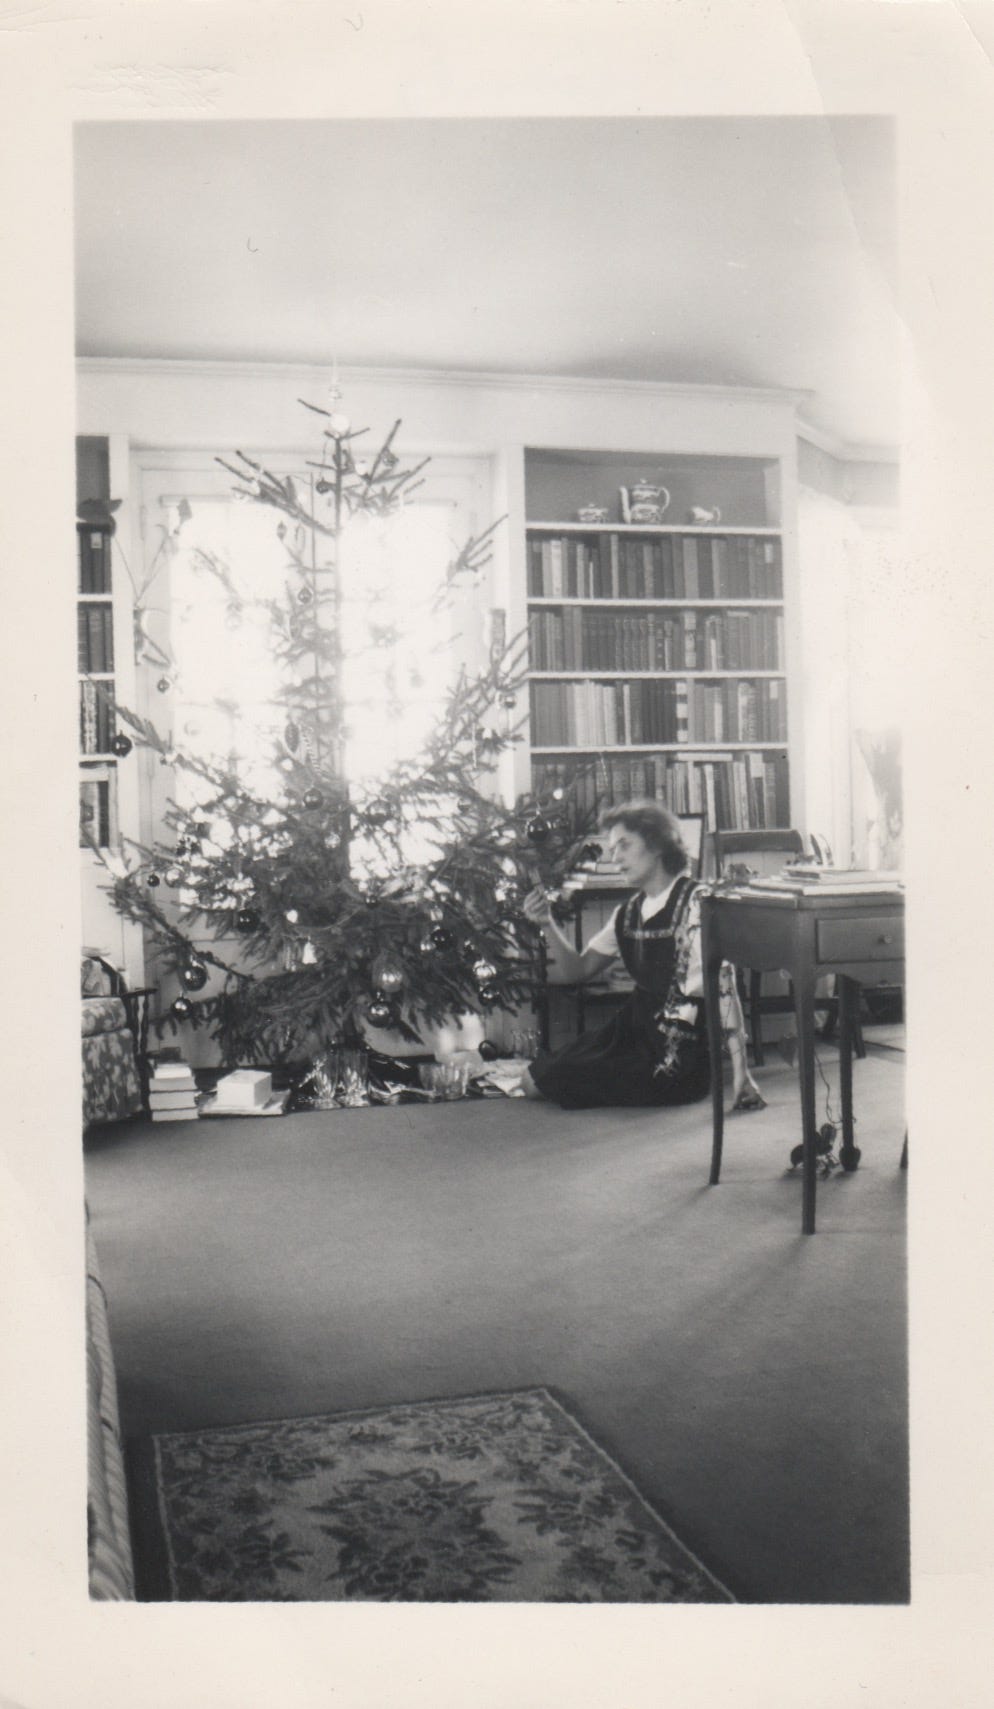 My grandma Maude at Riverby in front of the Christmas tree, a Norway Spruce, 1944